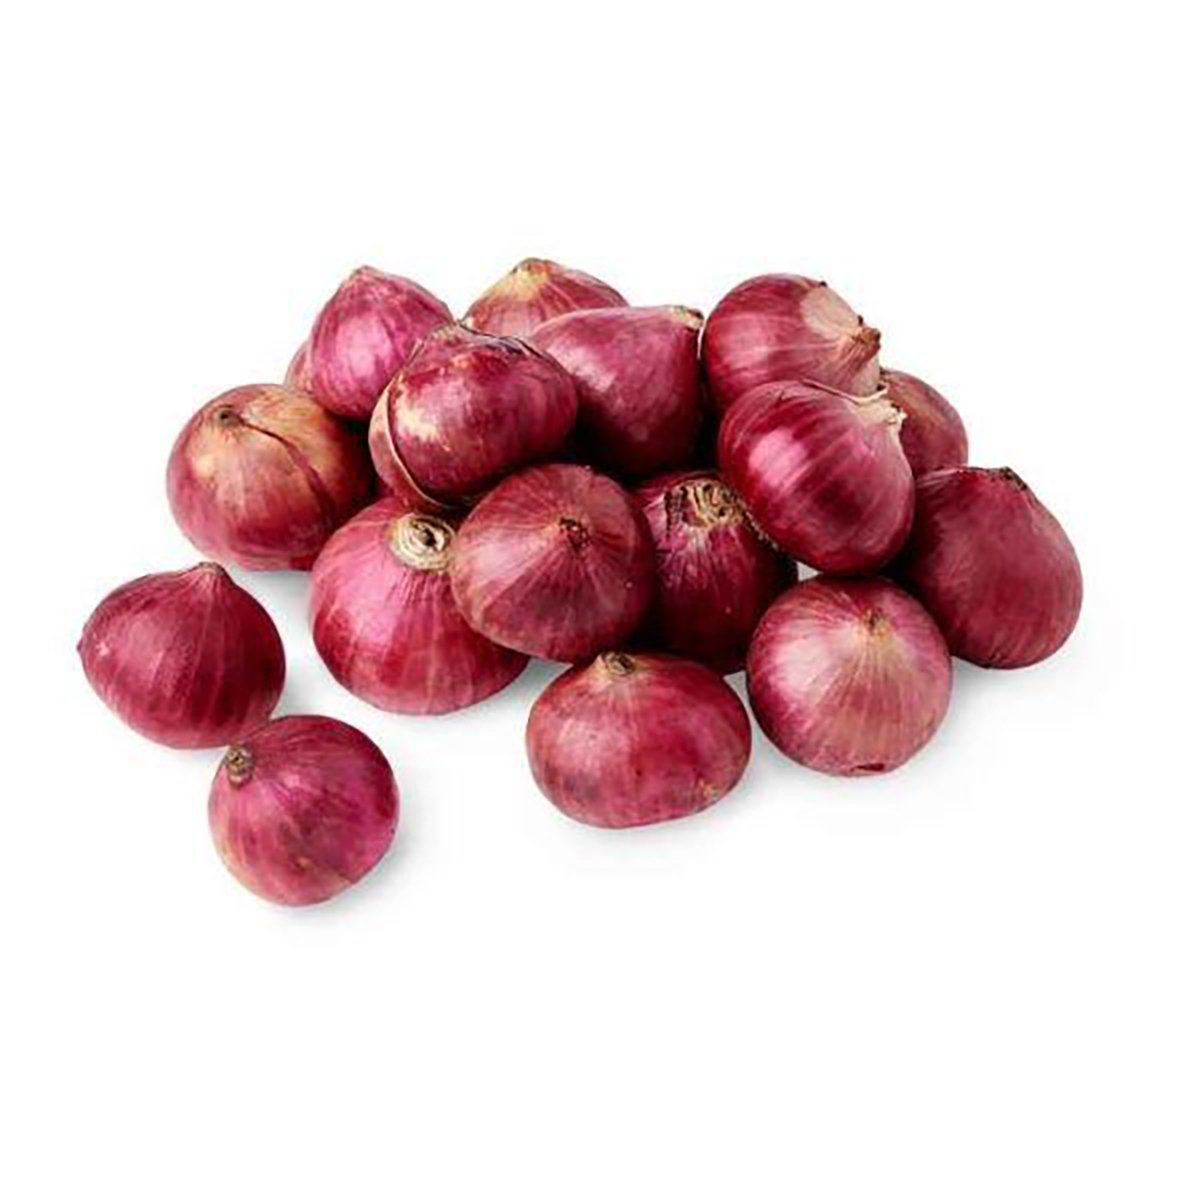 Onion Red Rose Shallot 500g Approx Weight